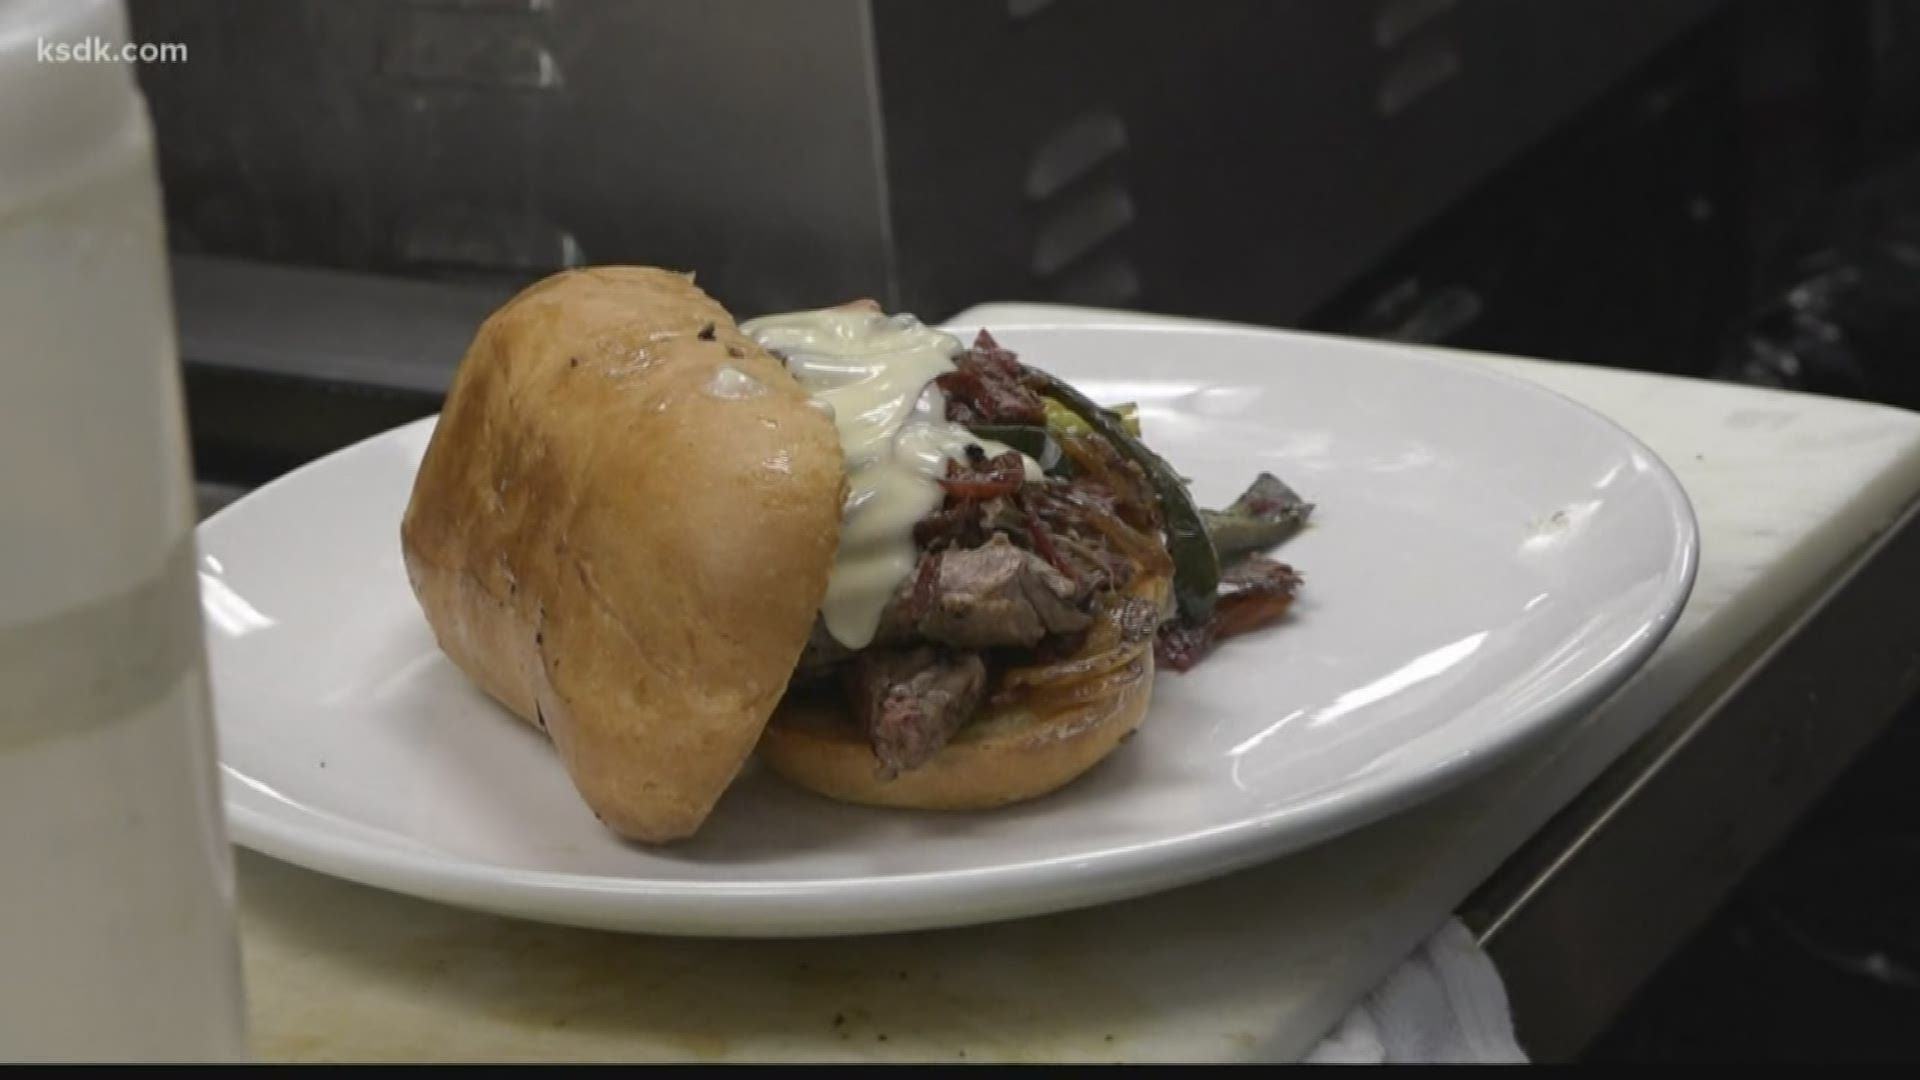 Frank Cusumano stopped by Knockout BBQ for this week's food picks.